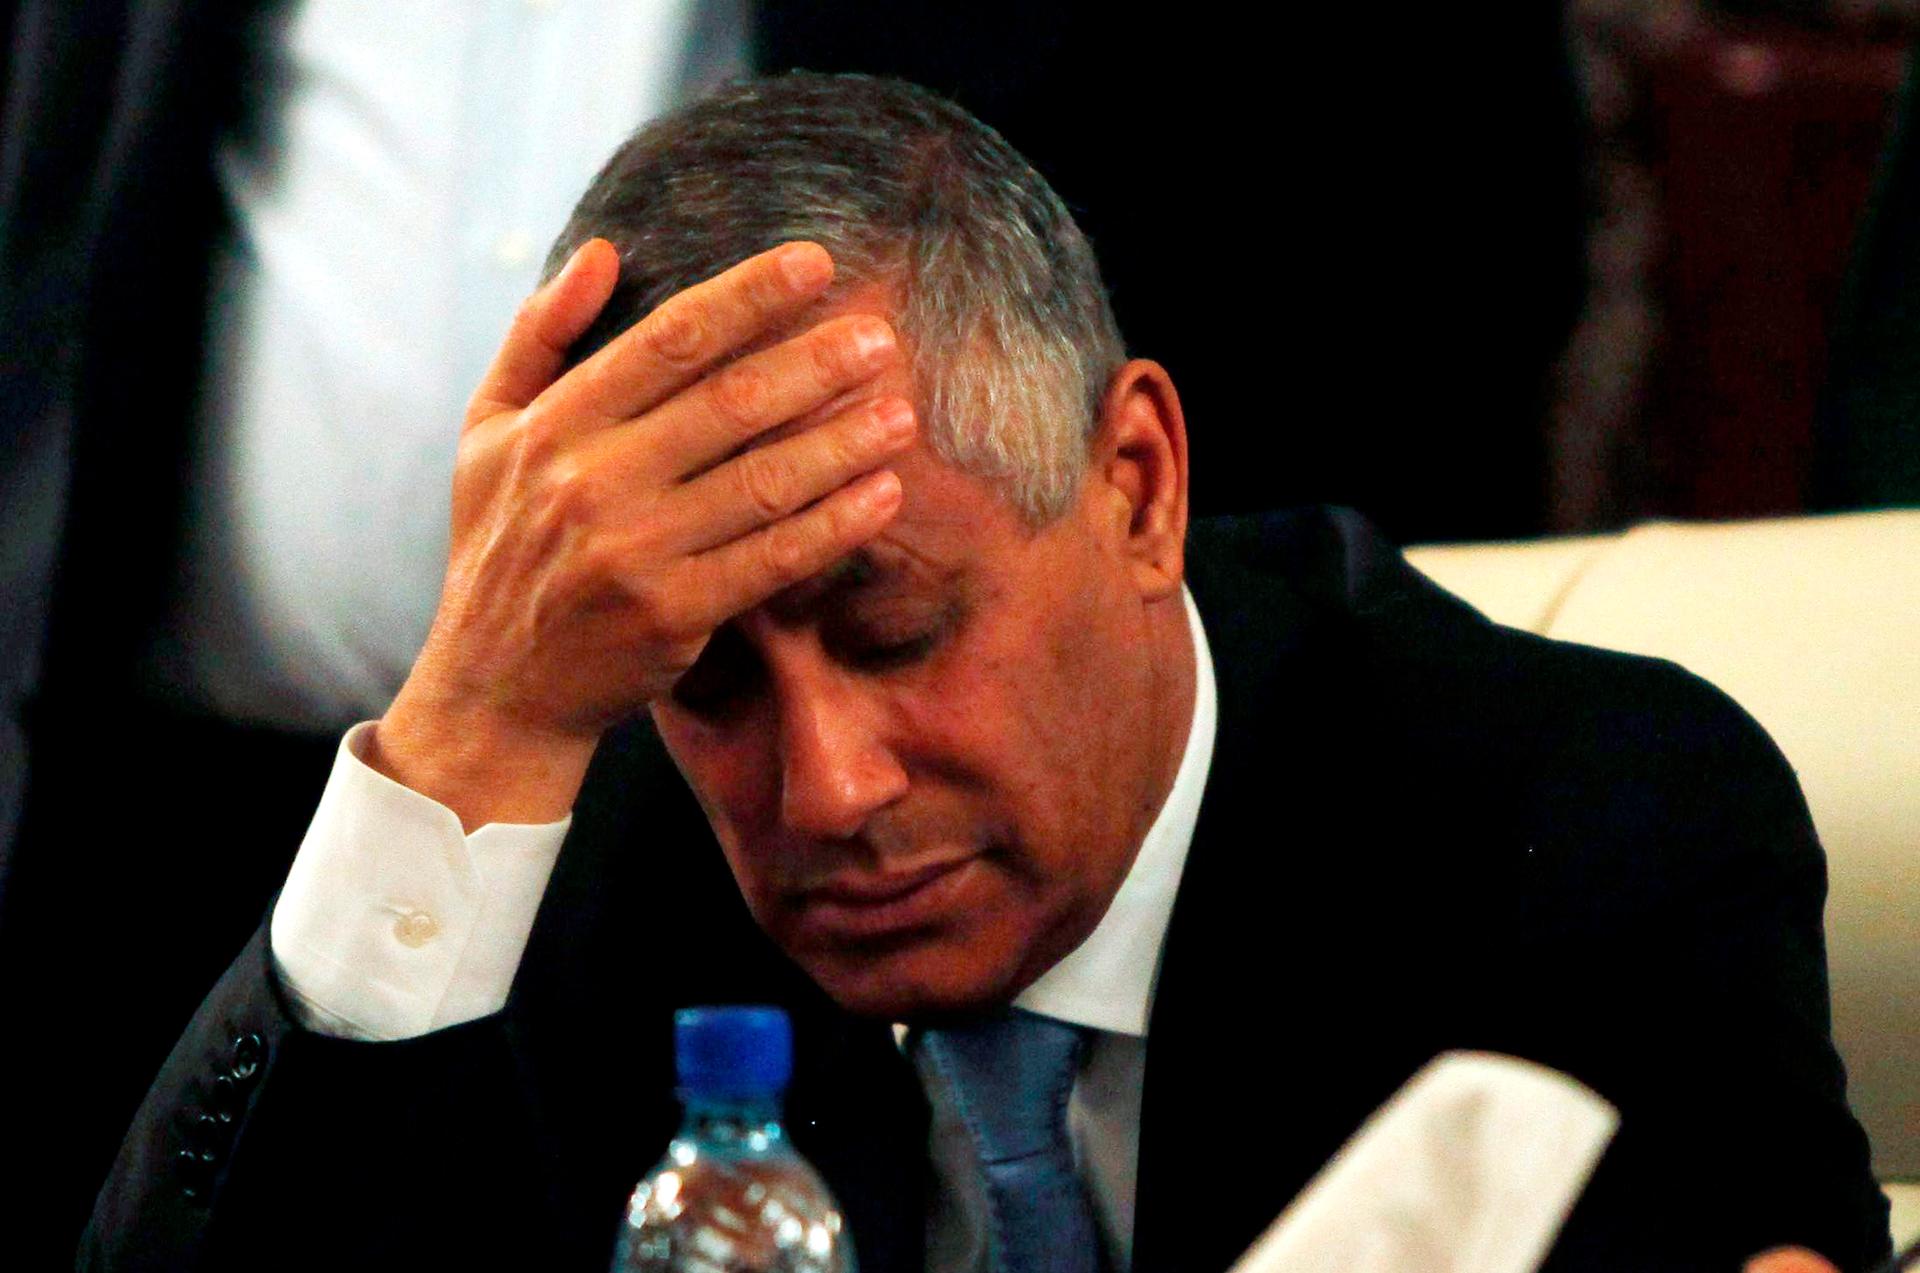 Libya's Prime Minister, Ali Zeidan, during a news conference after he was released by kidnappers, Thursday. Many Libyans are frustrated with the militias who compete for power in Libya, says Abigail Hauslohner of the Washington Post, and Zeidan's inabilit